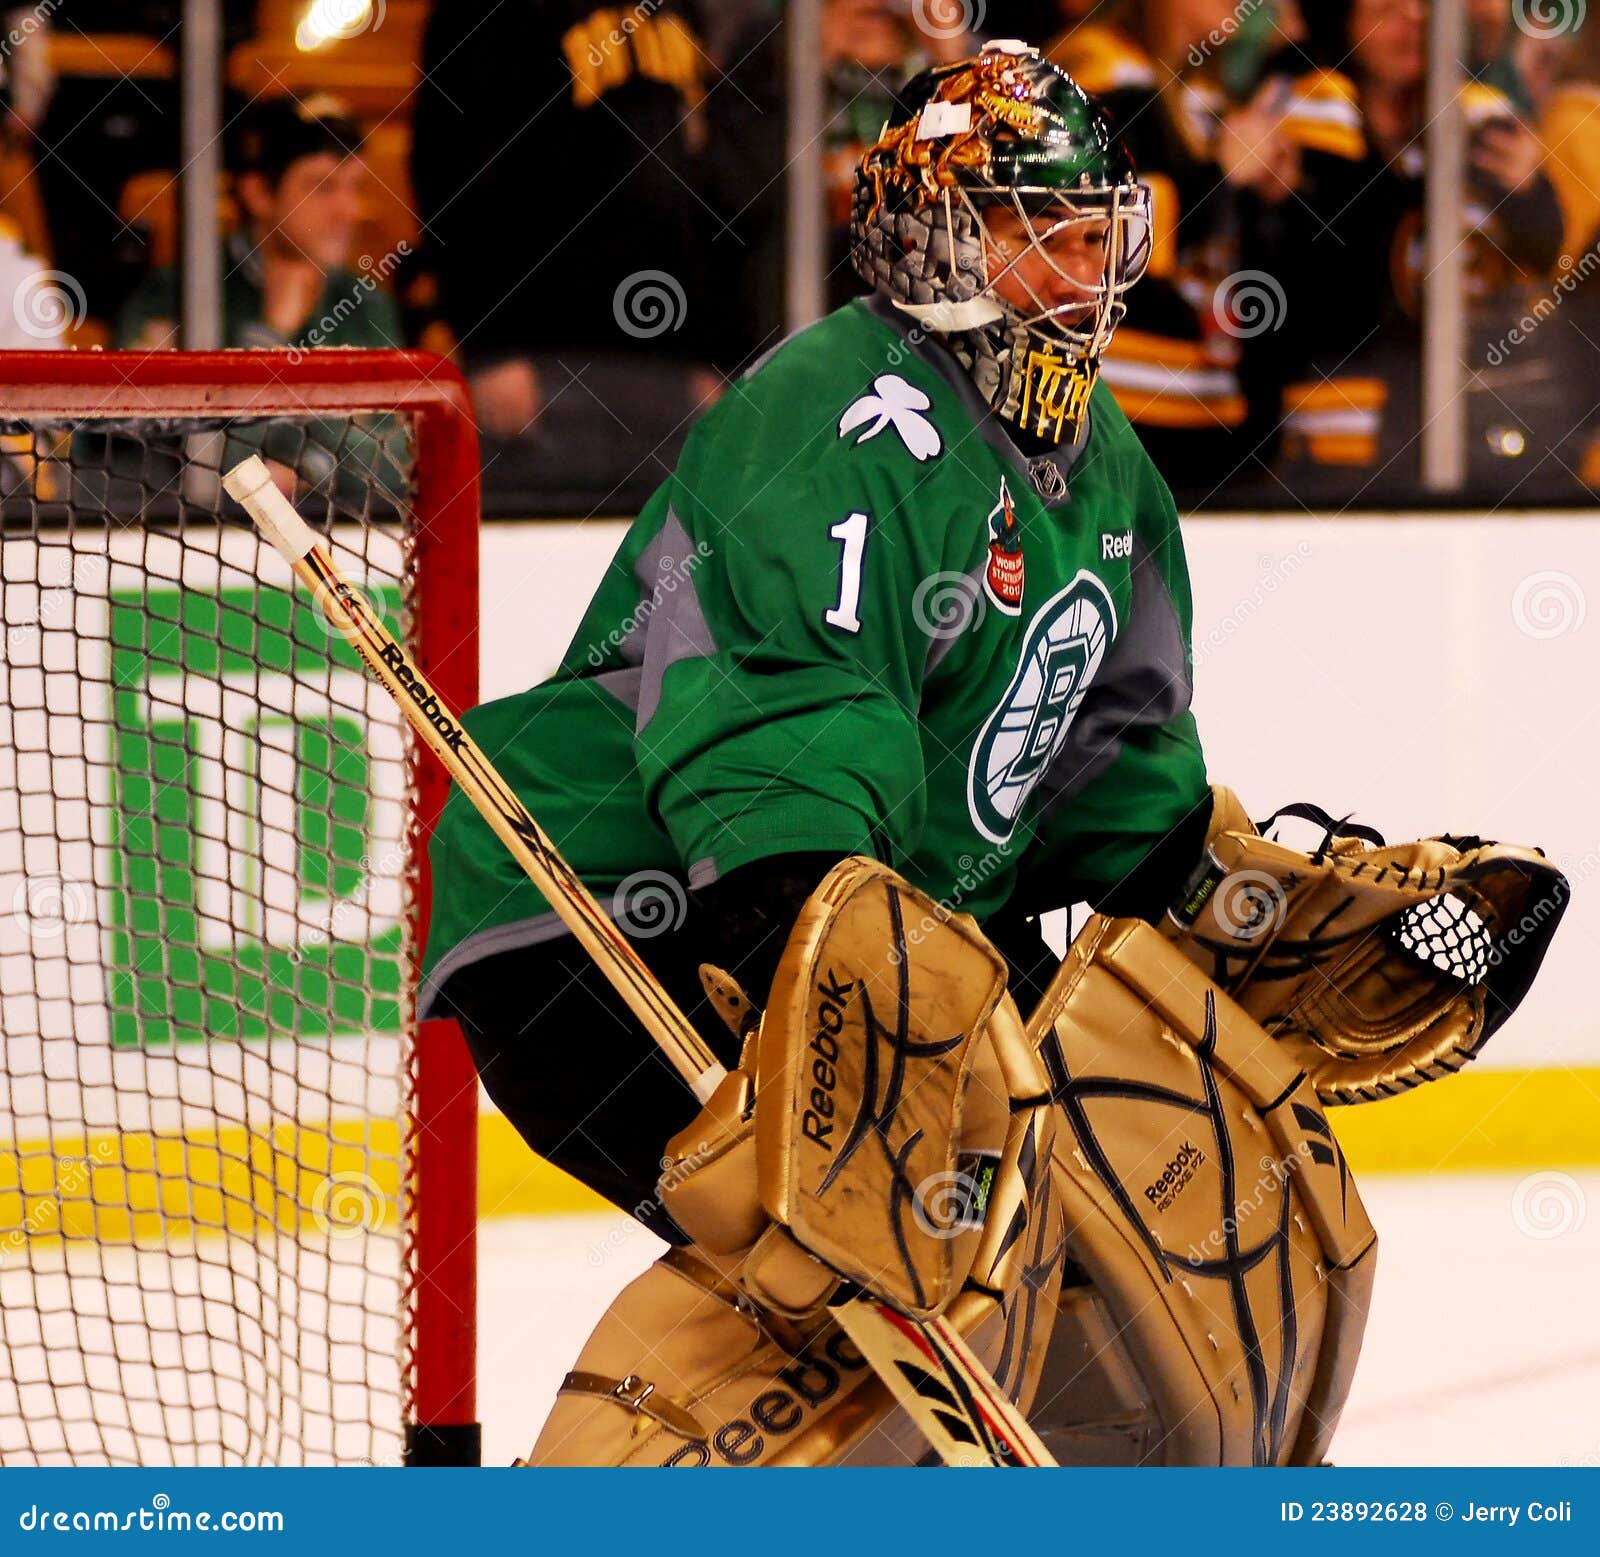 Images of goalie Marty Turco